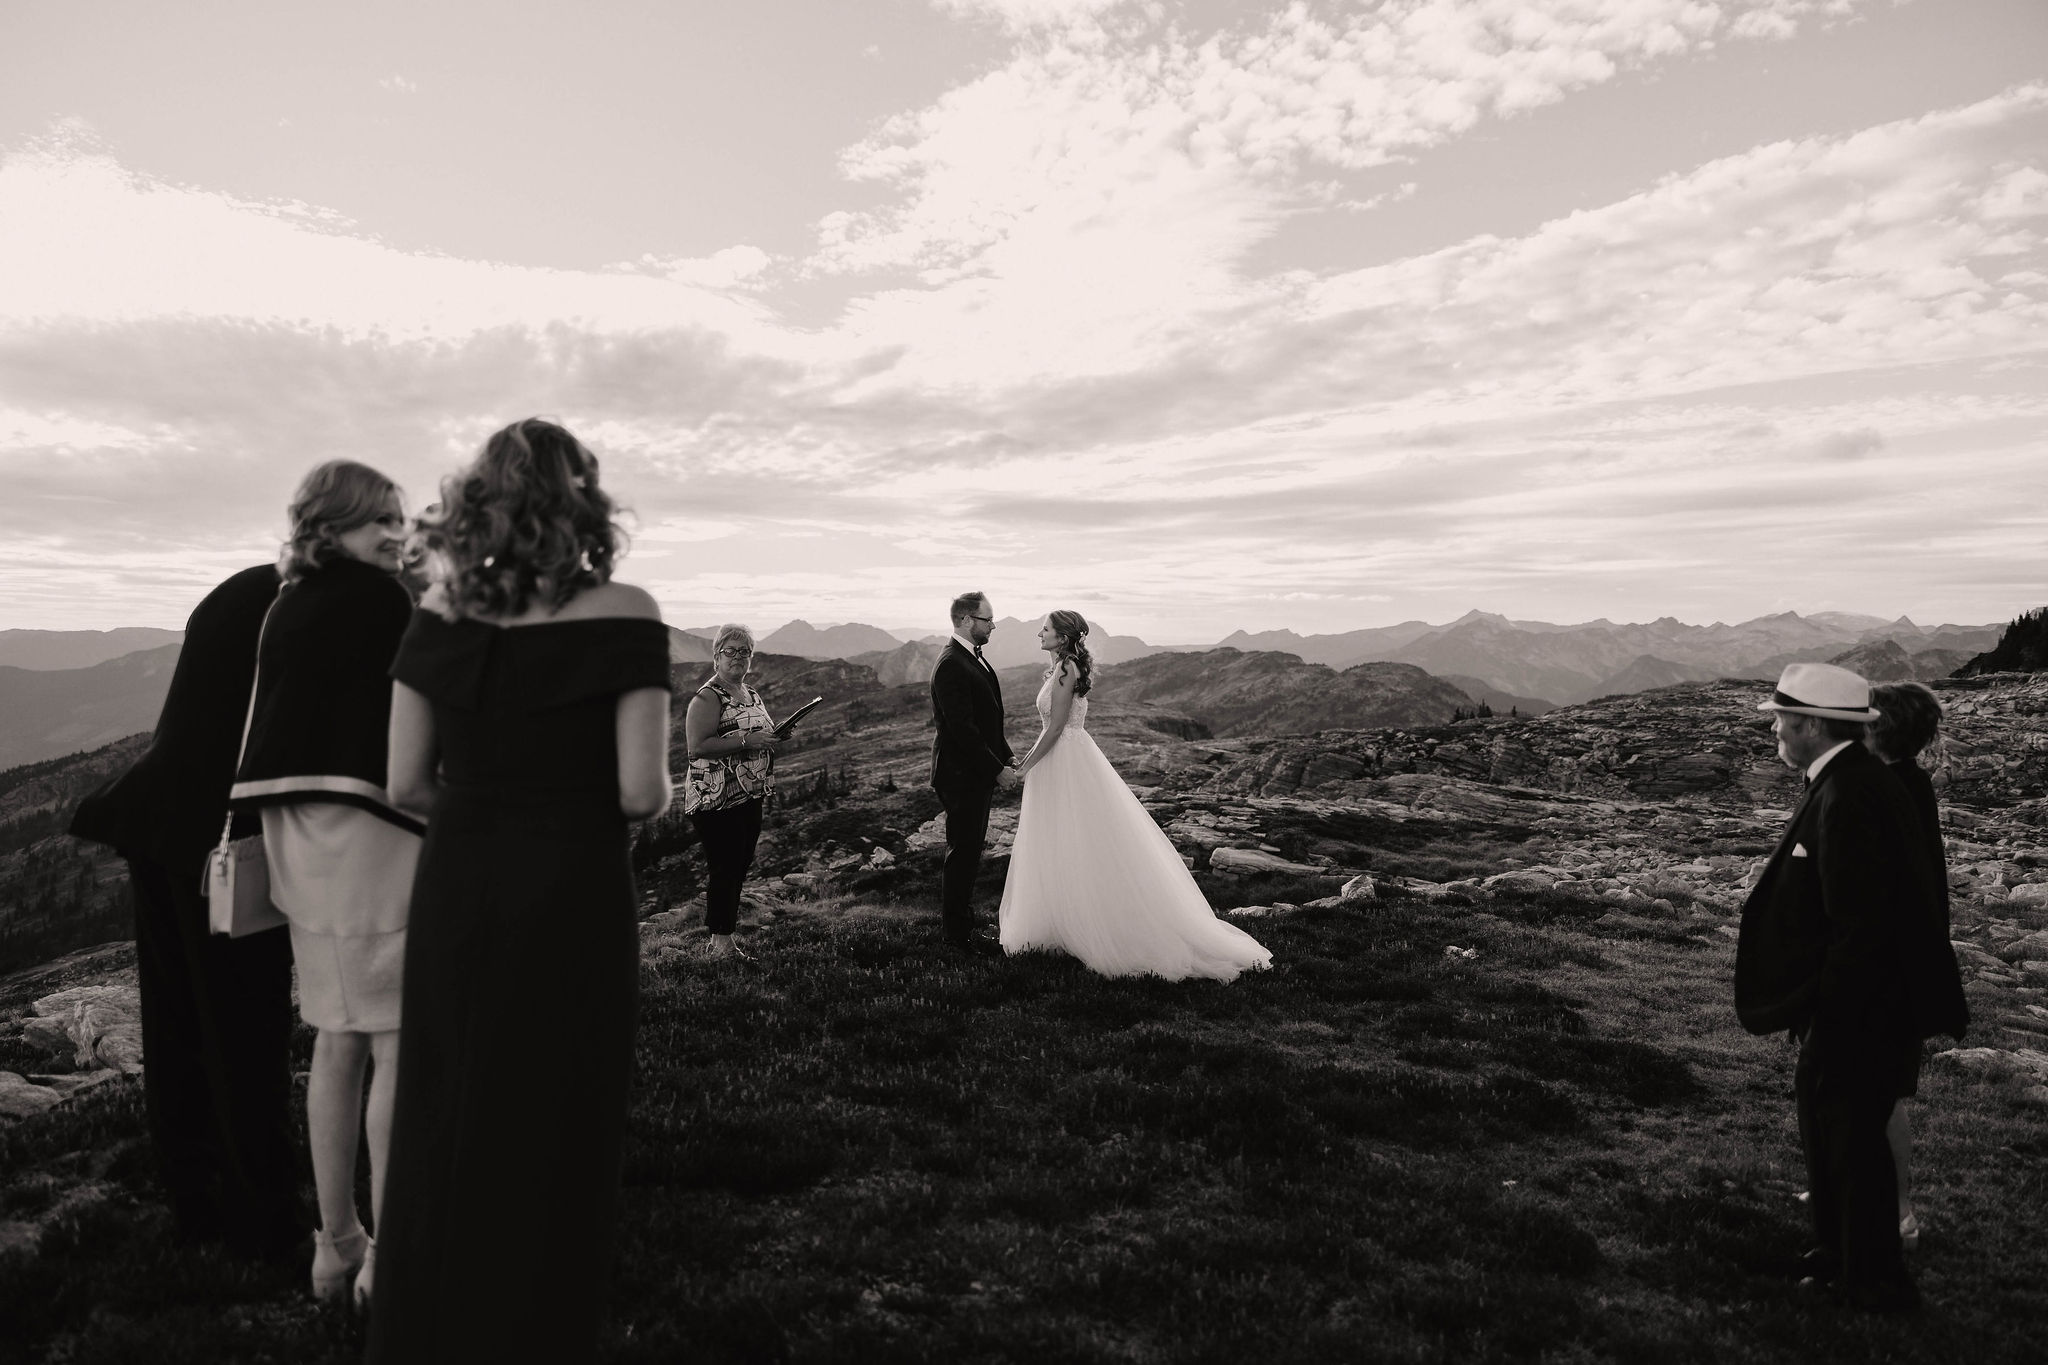 Capturing That Special Moment With a Whistler Wedding Photographer